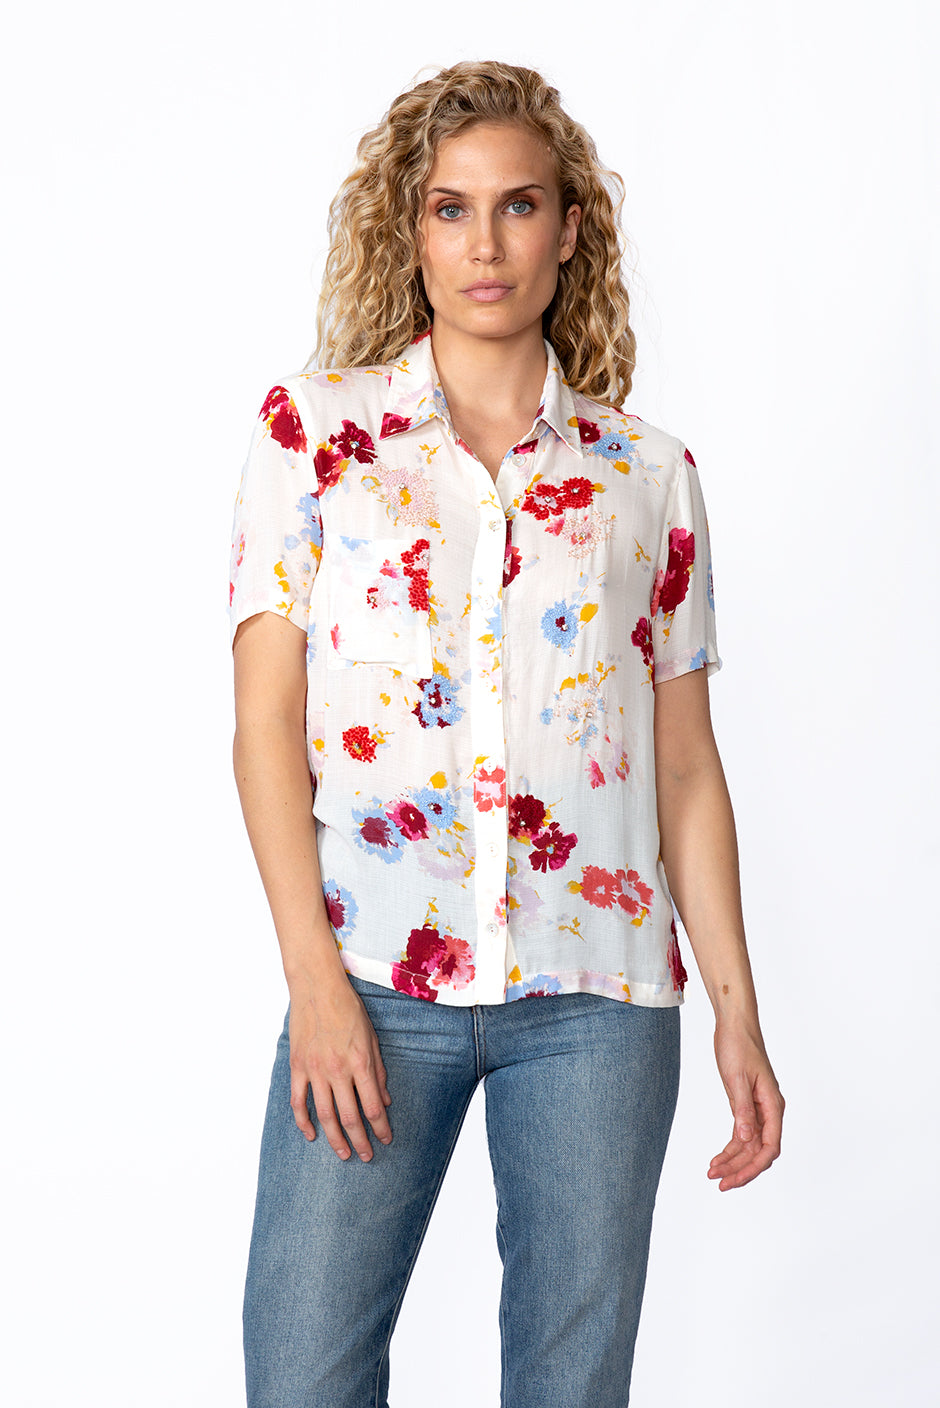 Beaded Kaia Shirt in Prairie Bloom print for women by Paneros Clothing. Hand beaded button up top from deadstock rayon. Front View.